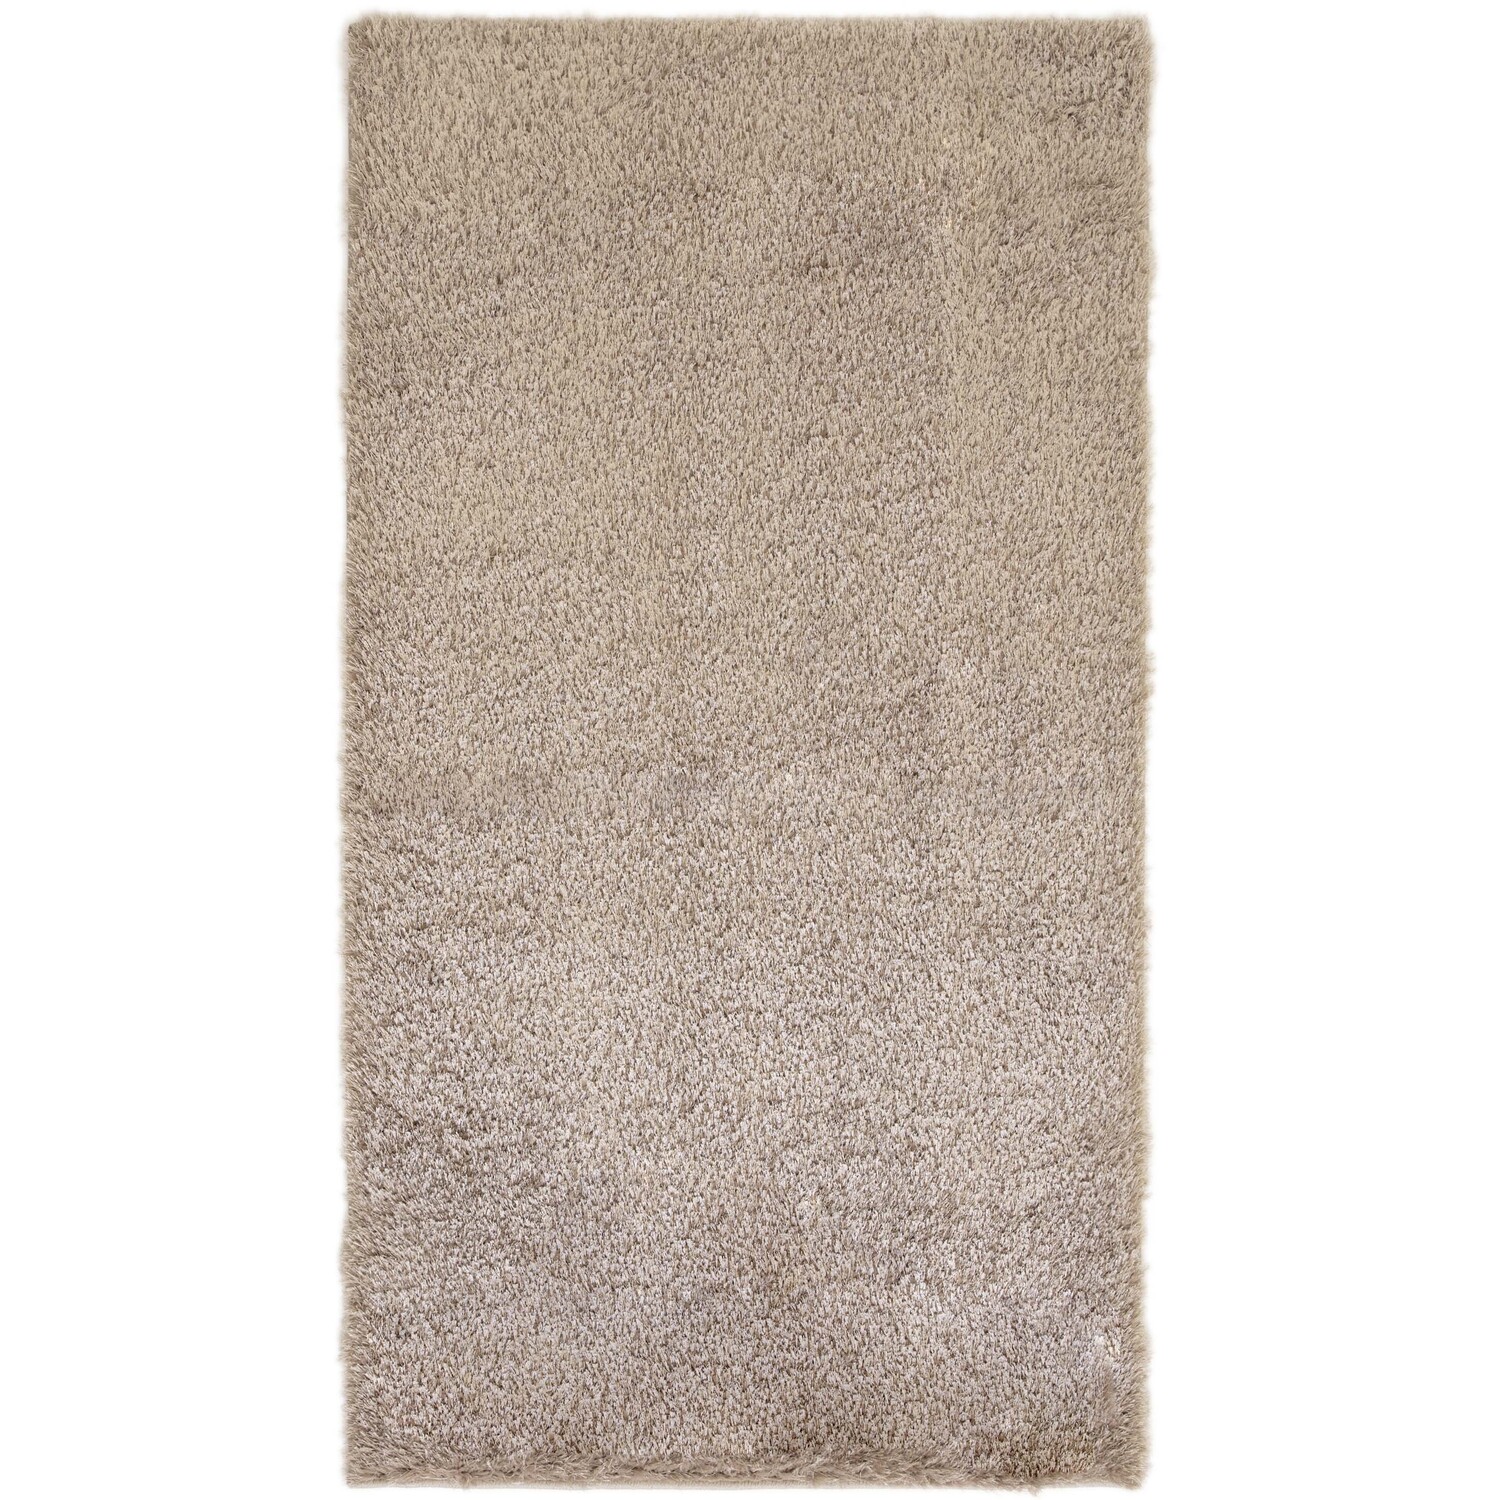 Sumptuous Runner - Taupe Image